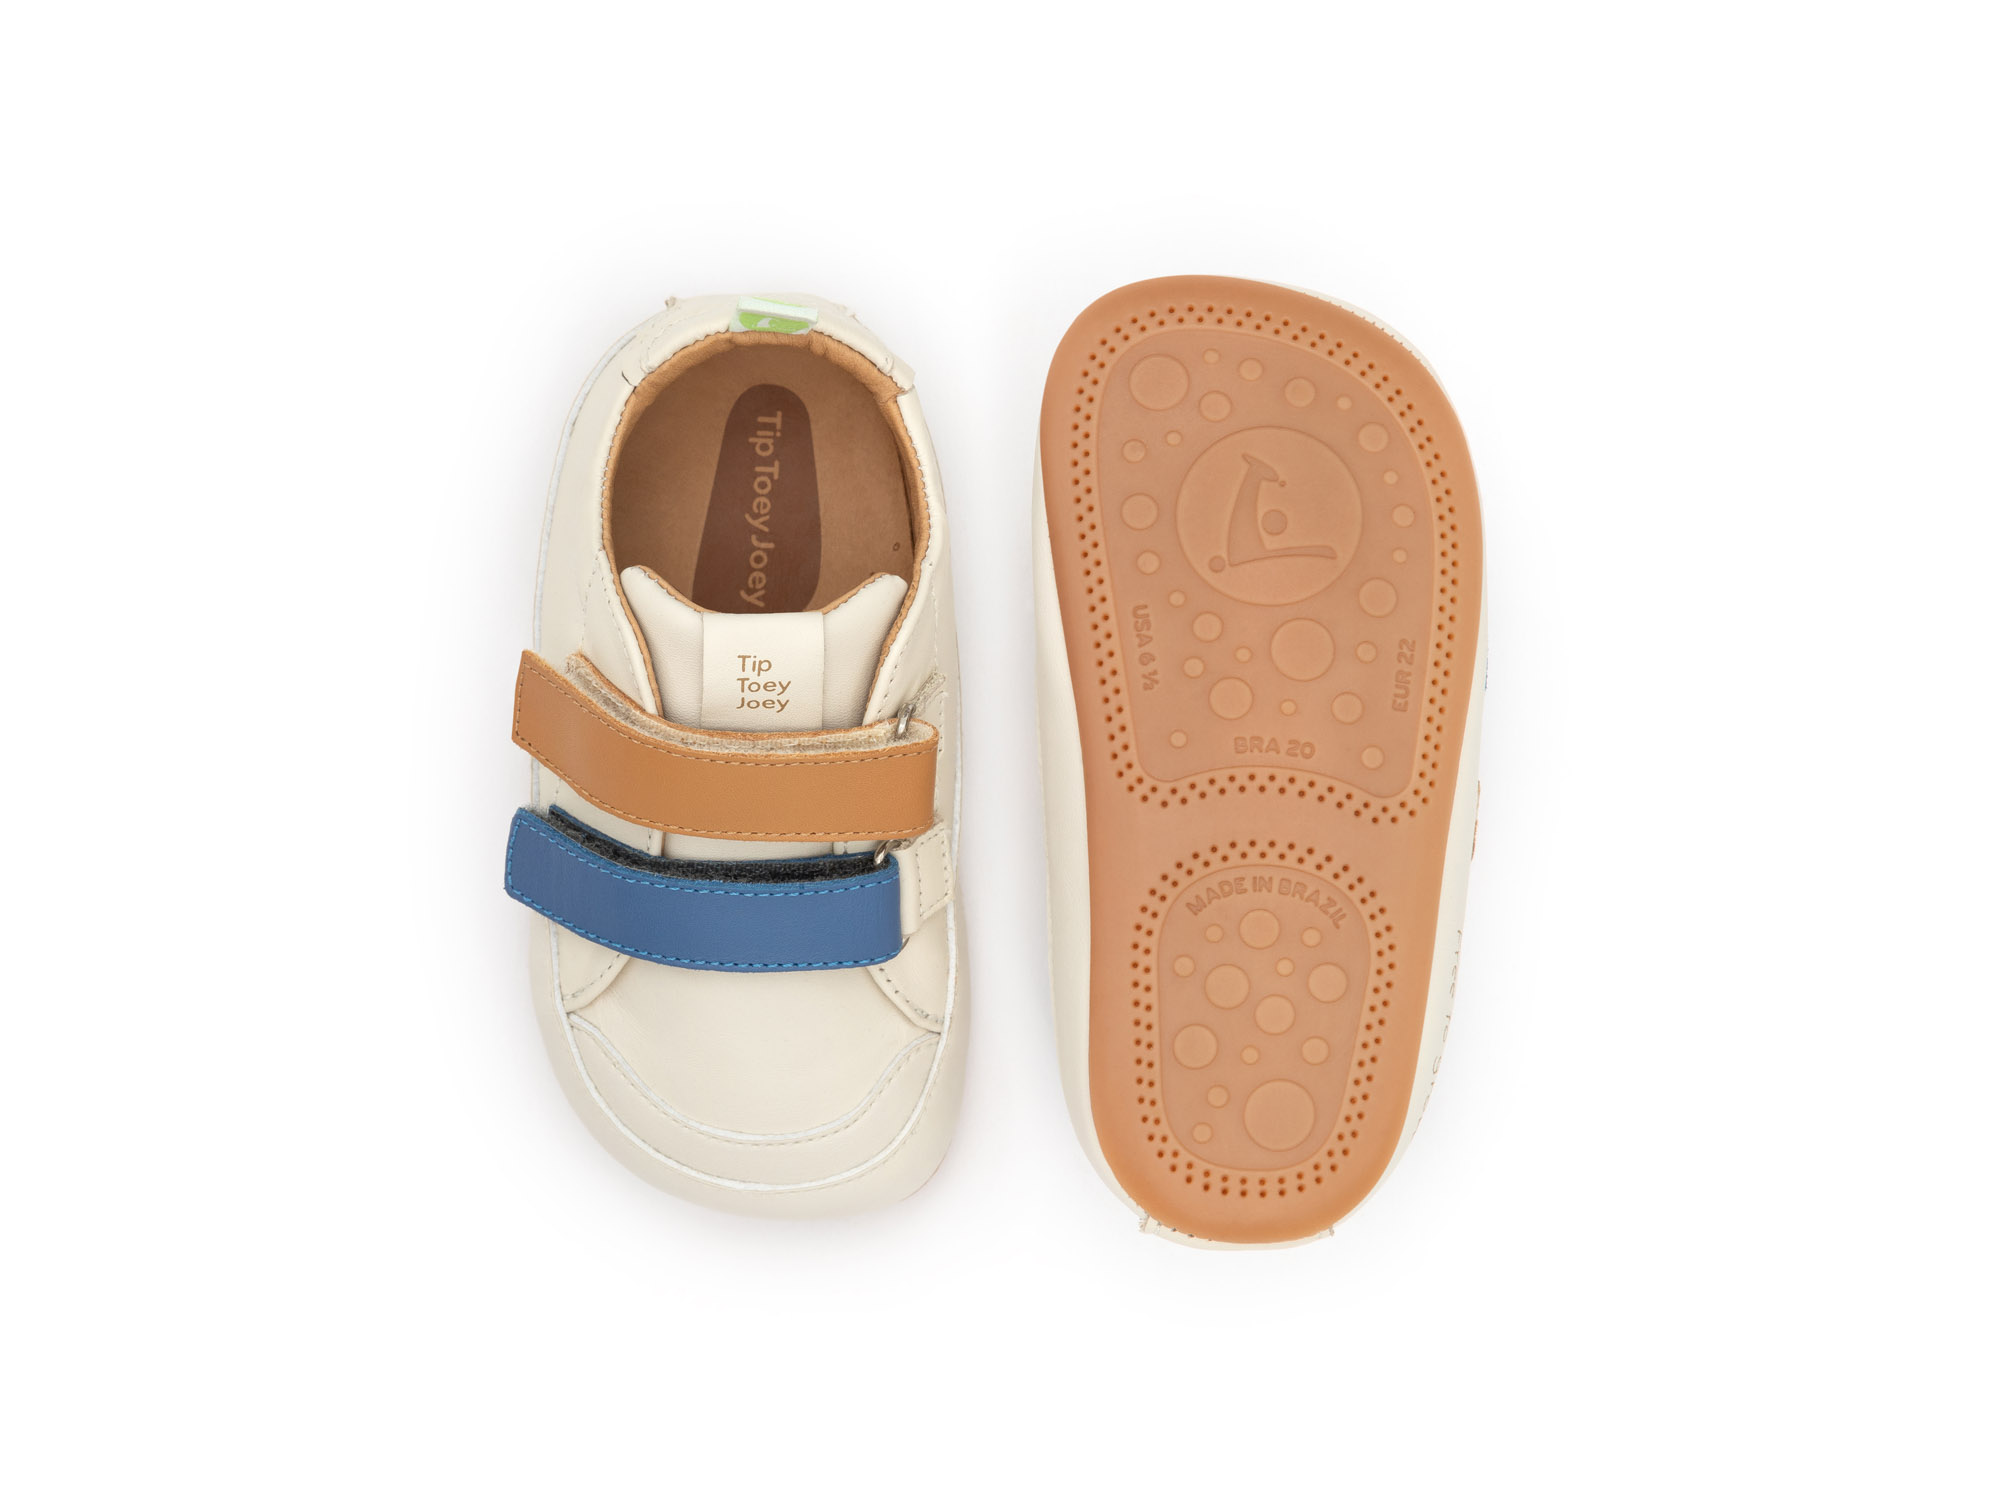 UP & GO Sneakers for Boys Bossy Play | Tip Toey Joey - Australia - 2